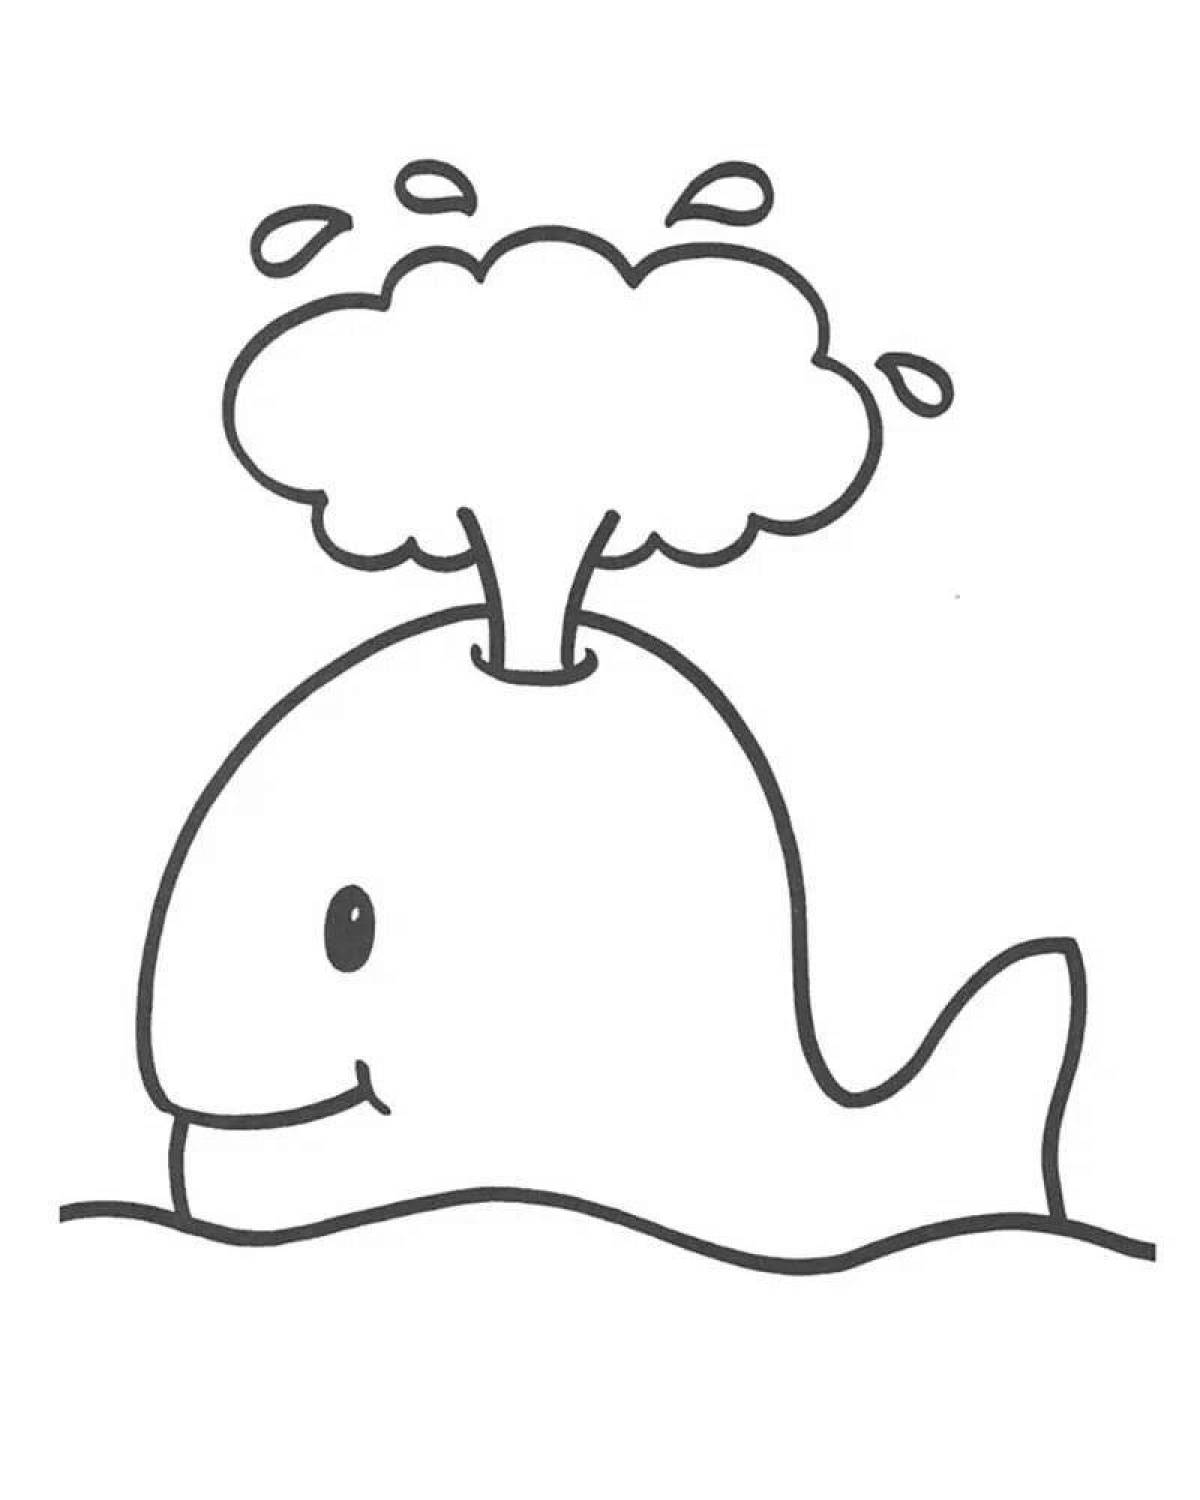 Exquisite whale coloring page for kids